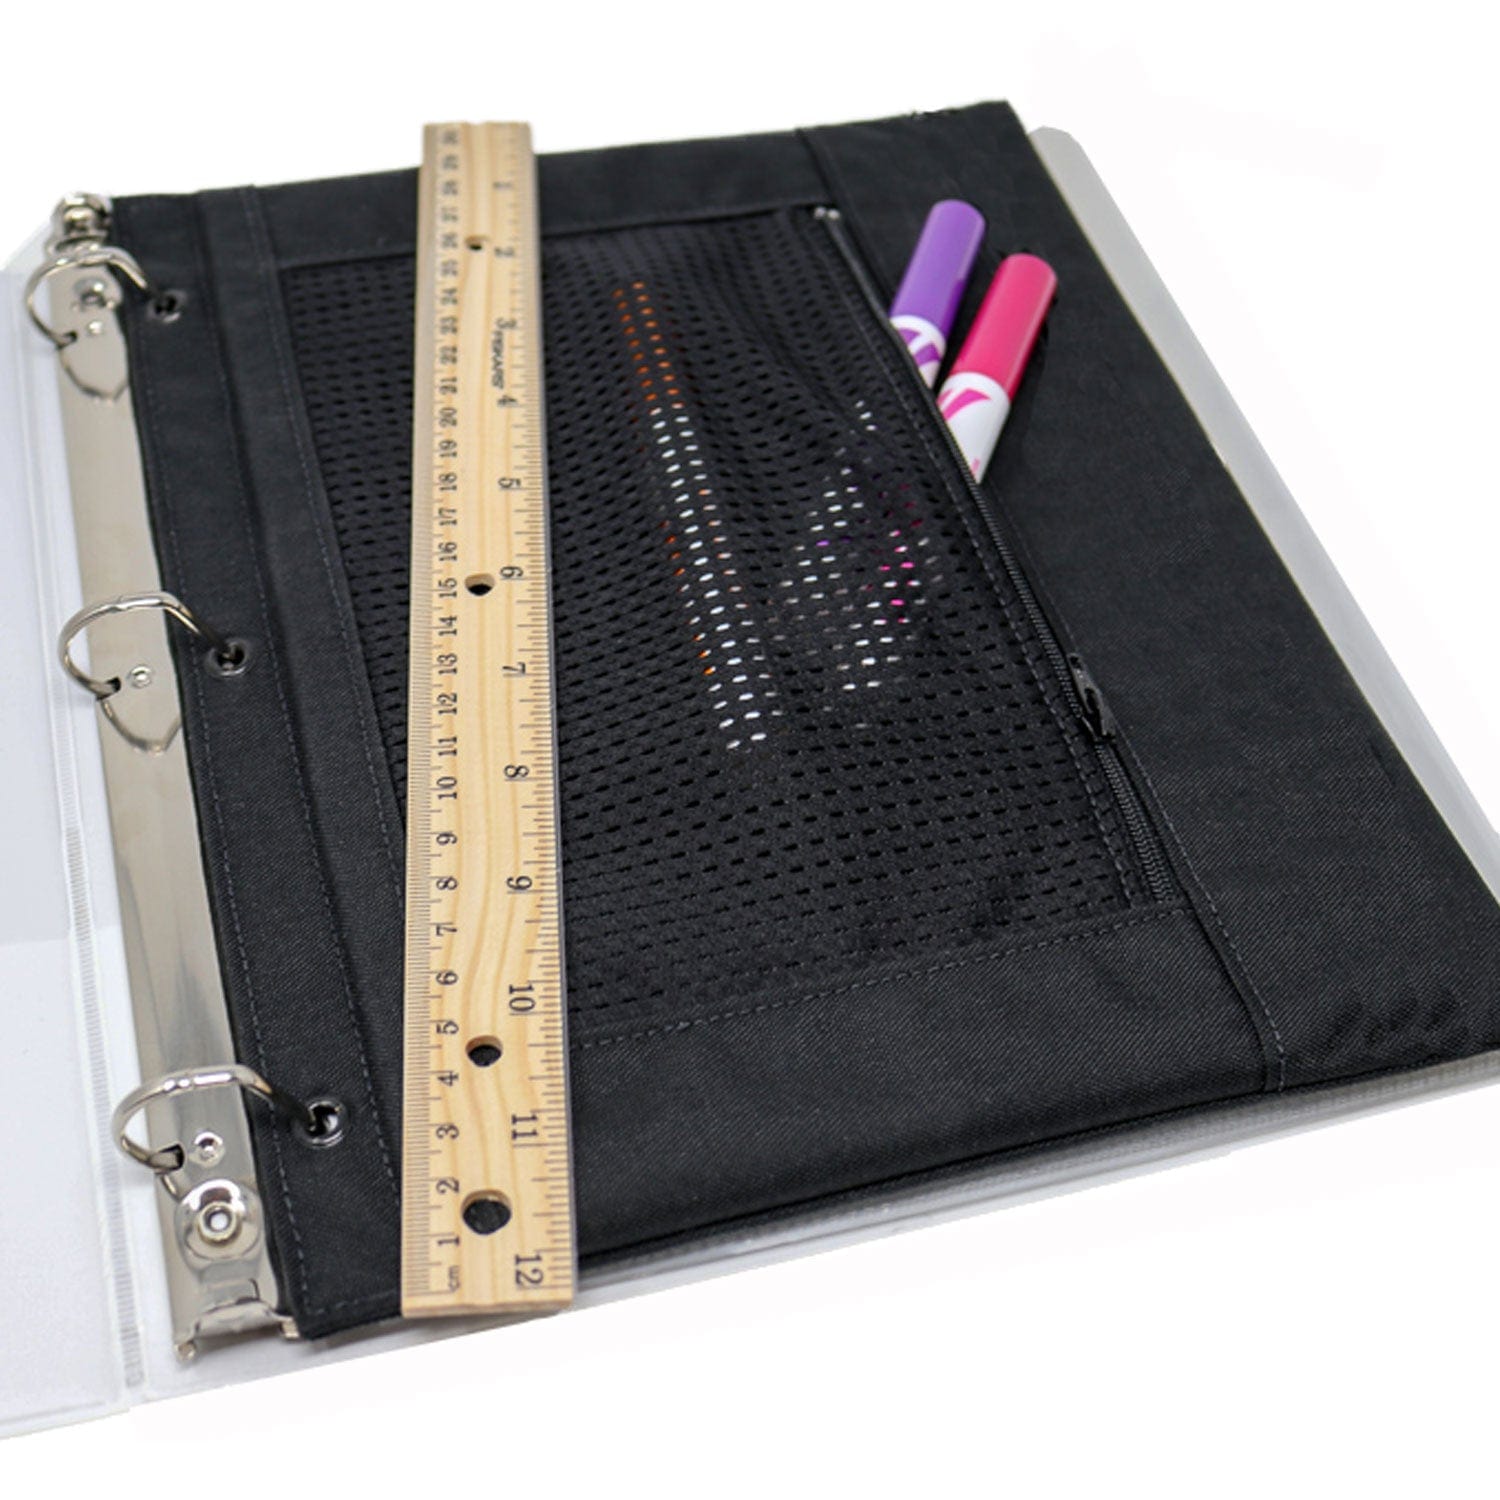 Image of the Bulletproof 3-Ring Pencil pouch. Shop armor for children and school safety.